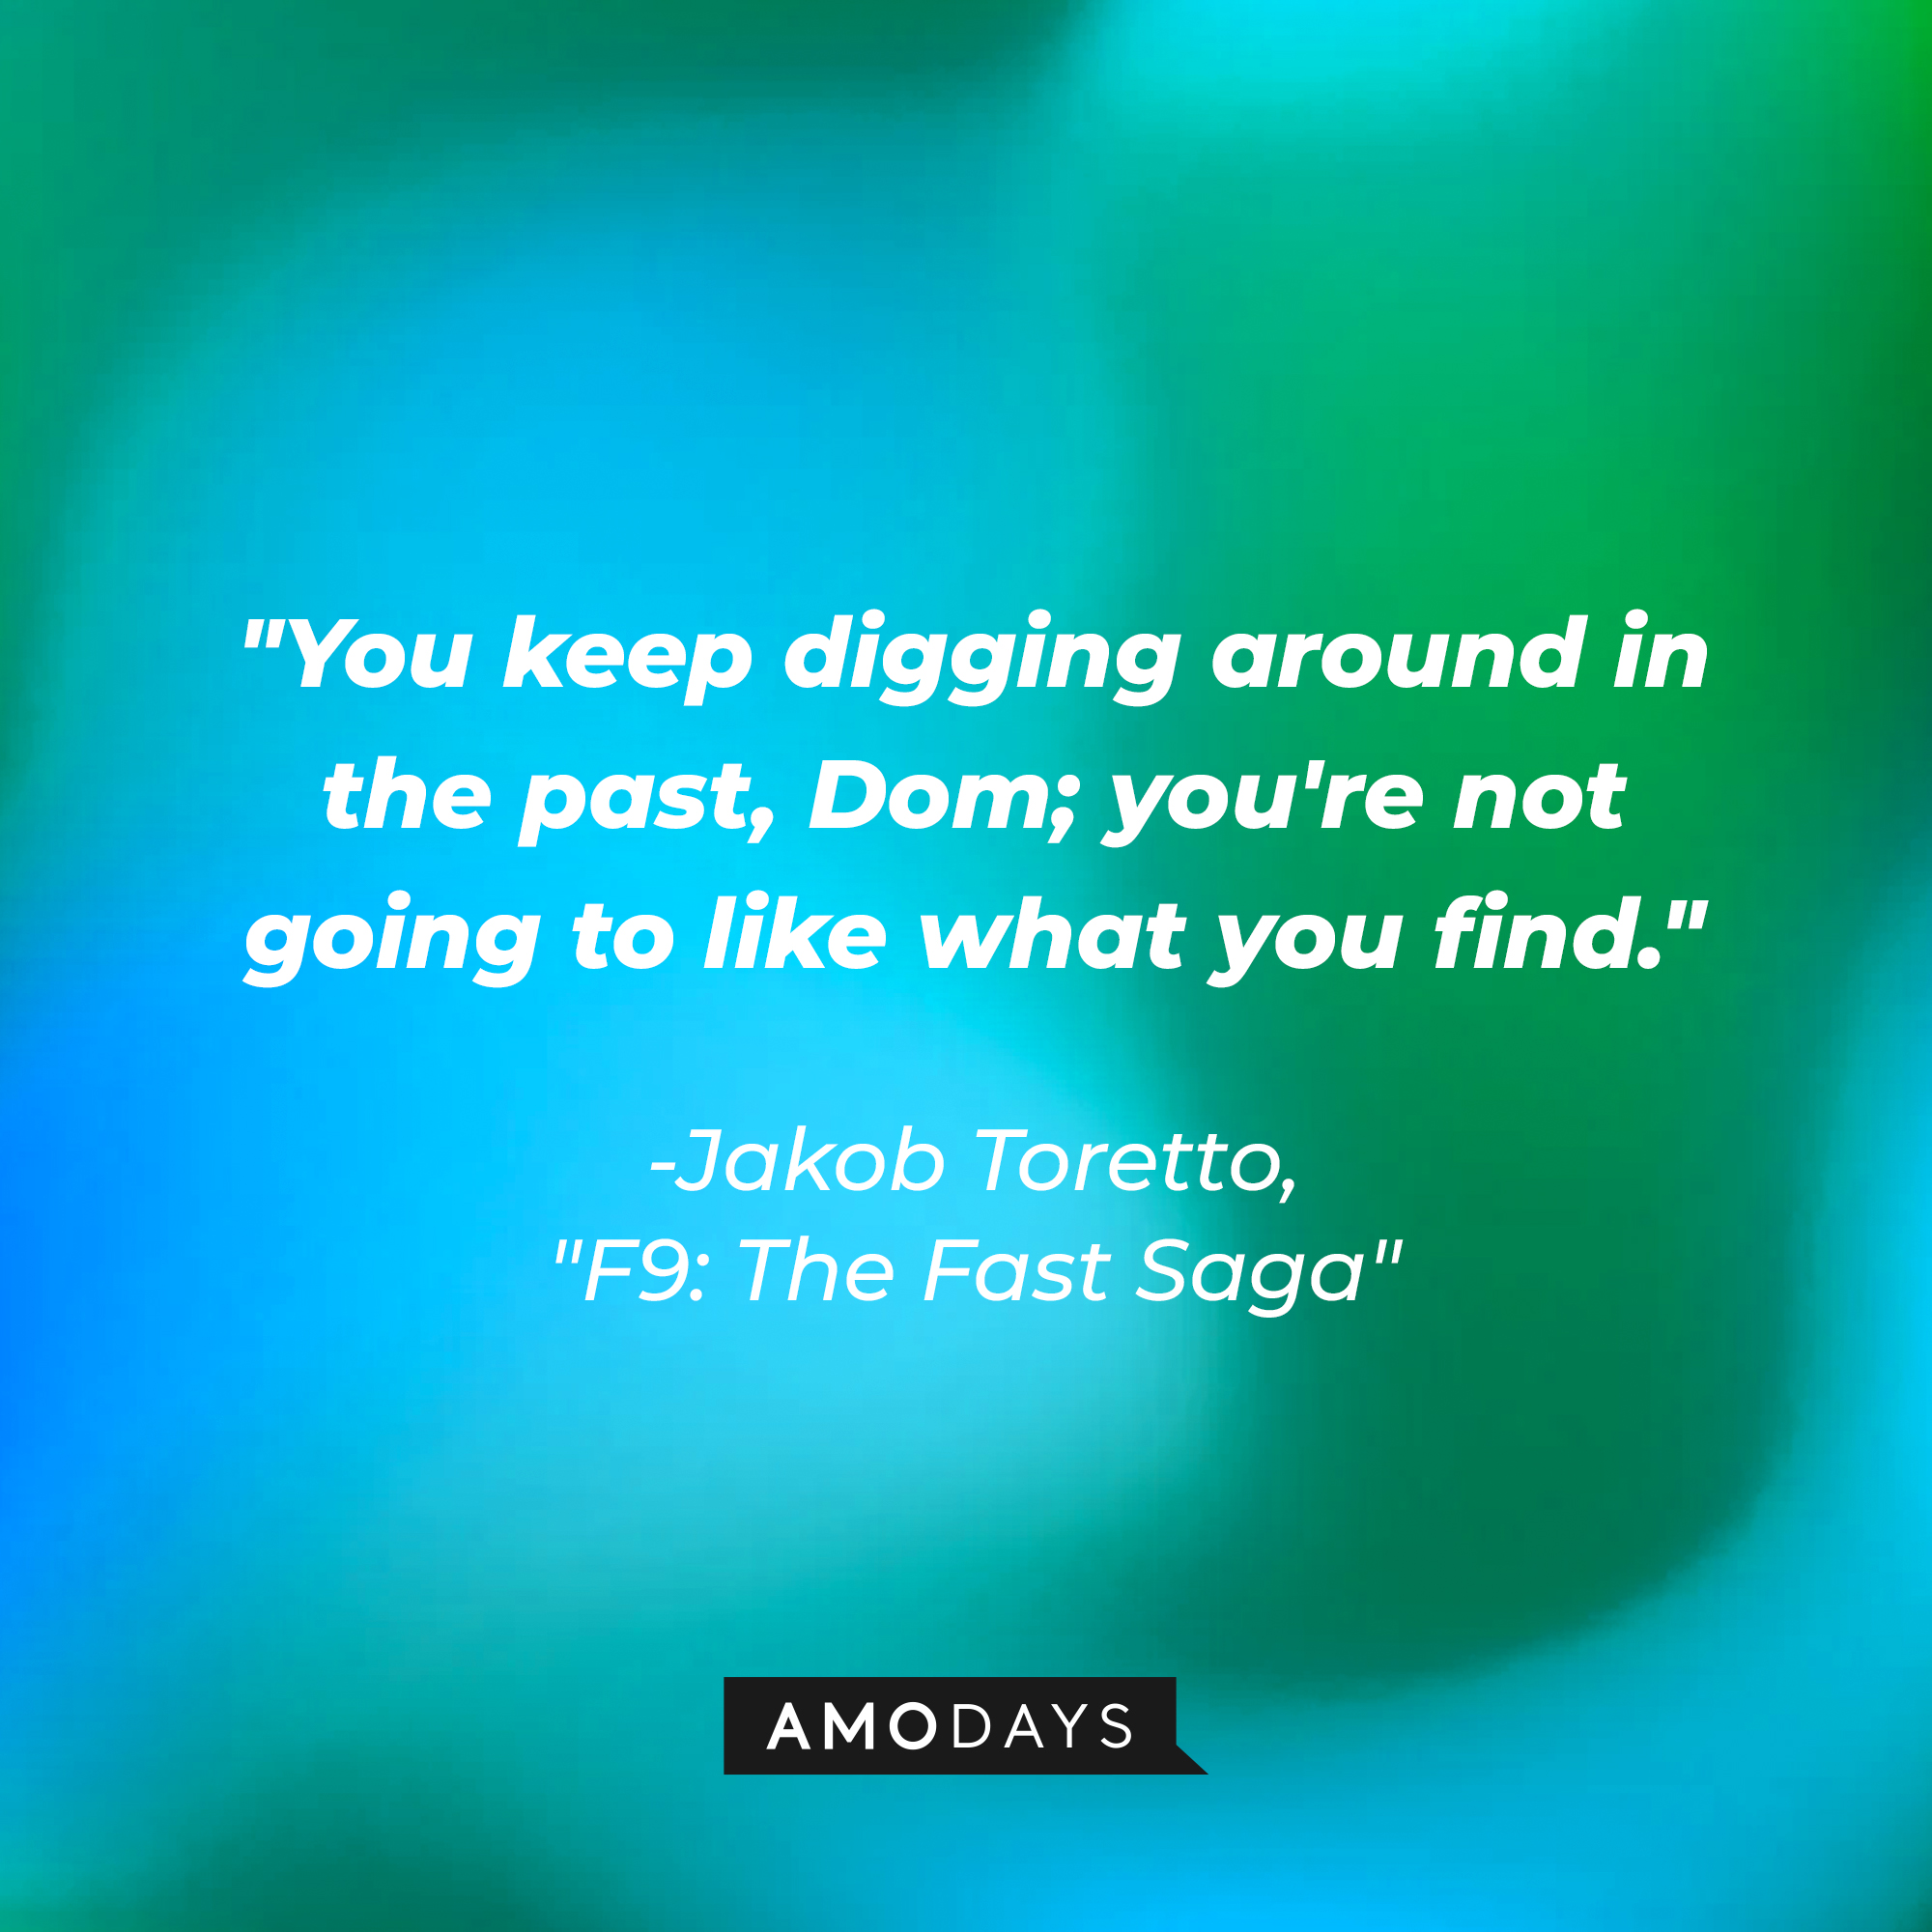 Jakob Toretto’s quote: "You keep digging around in the past, Dom; you're not going to like what you find."  | Image: AmoDays